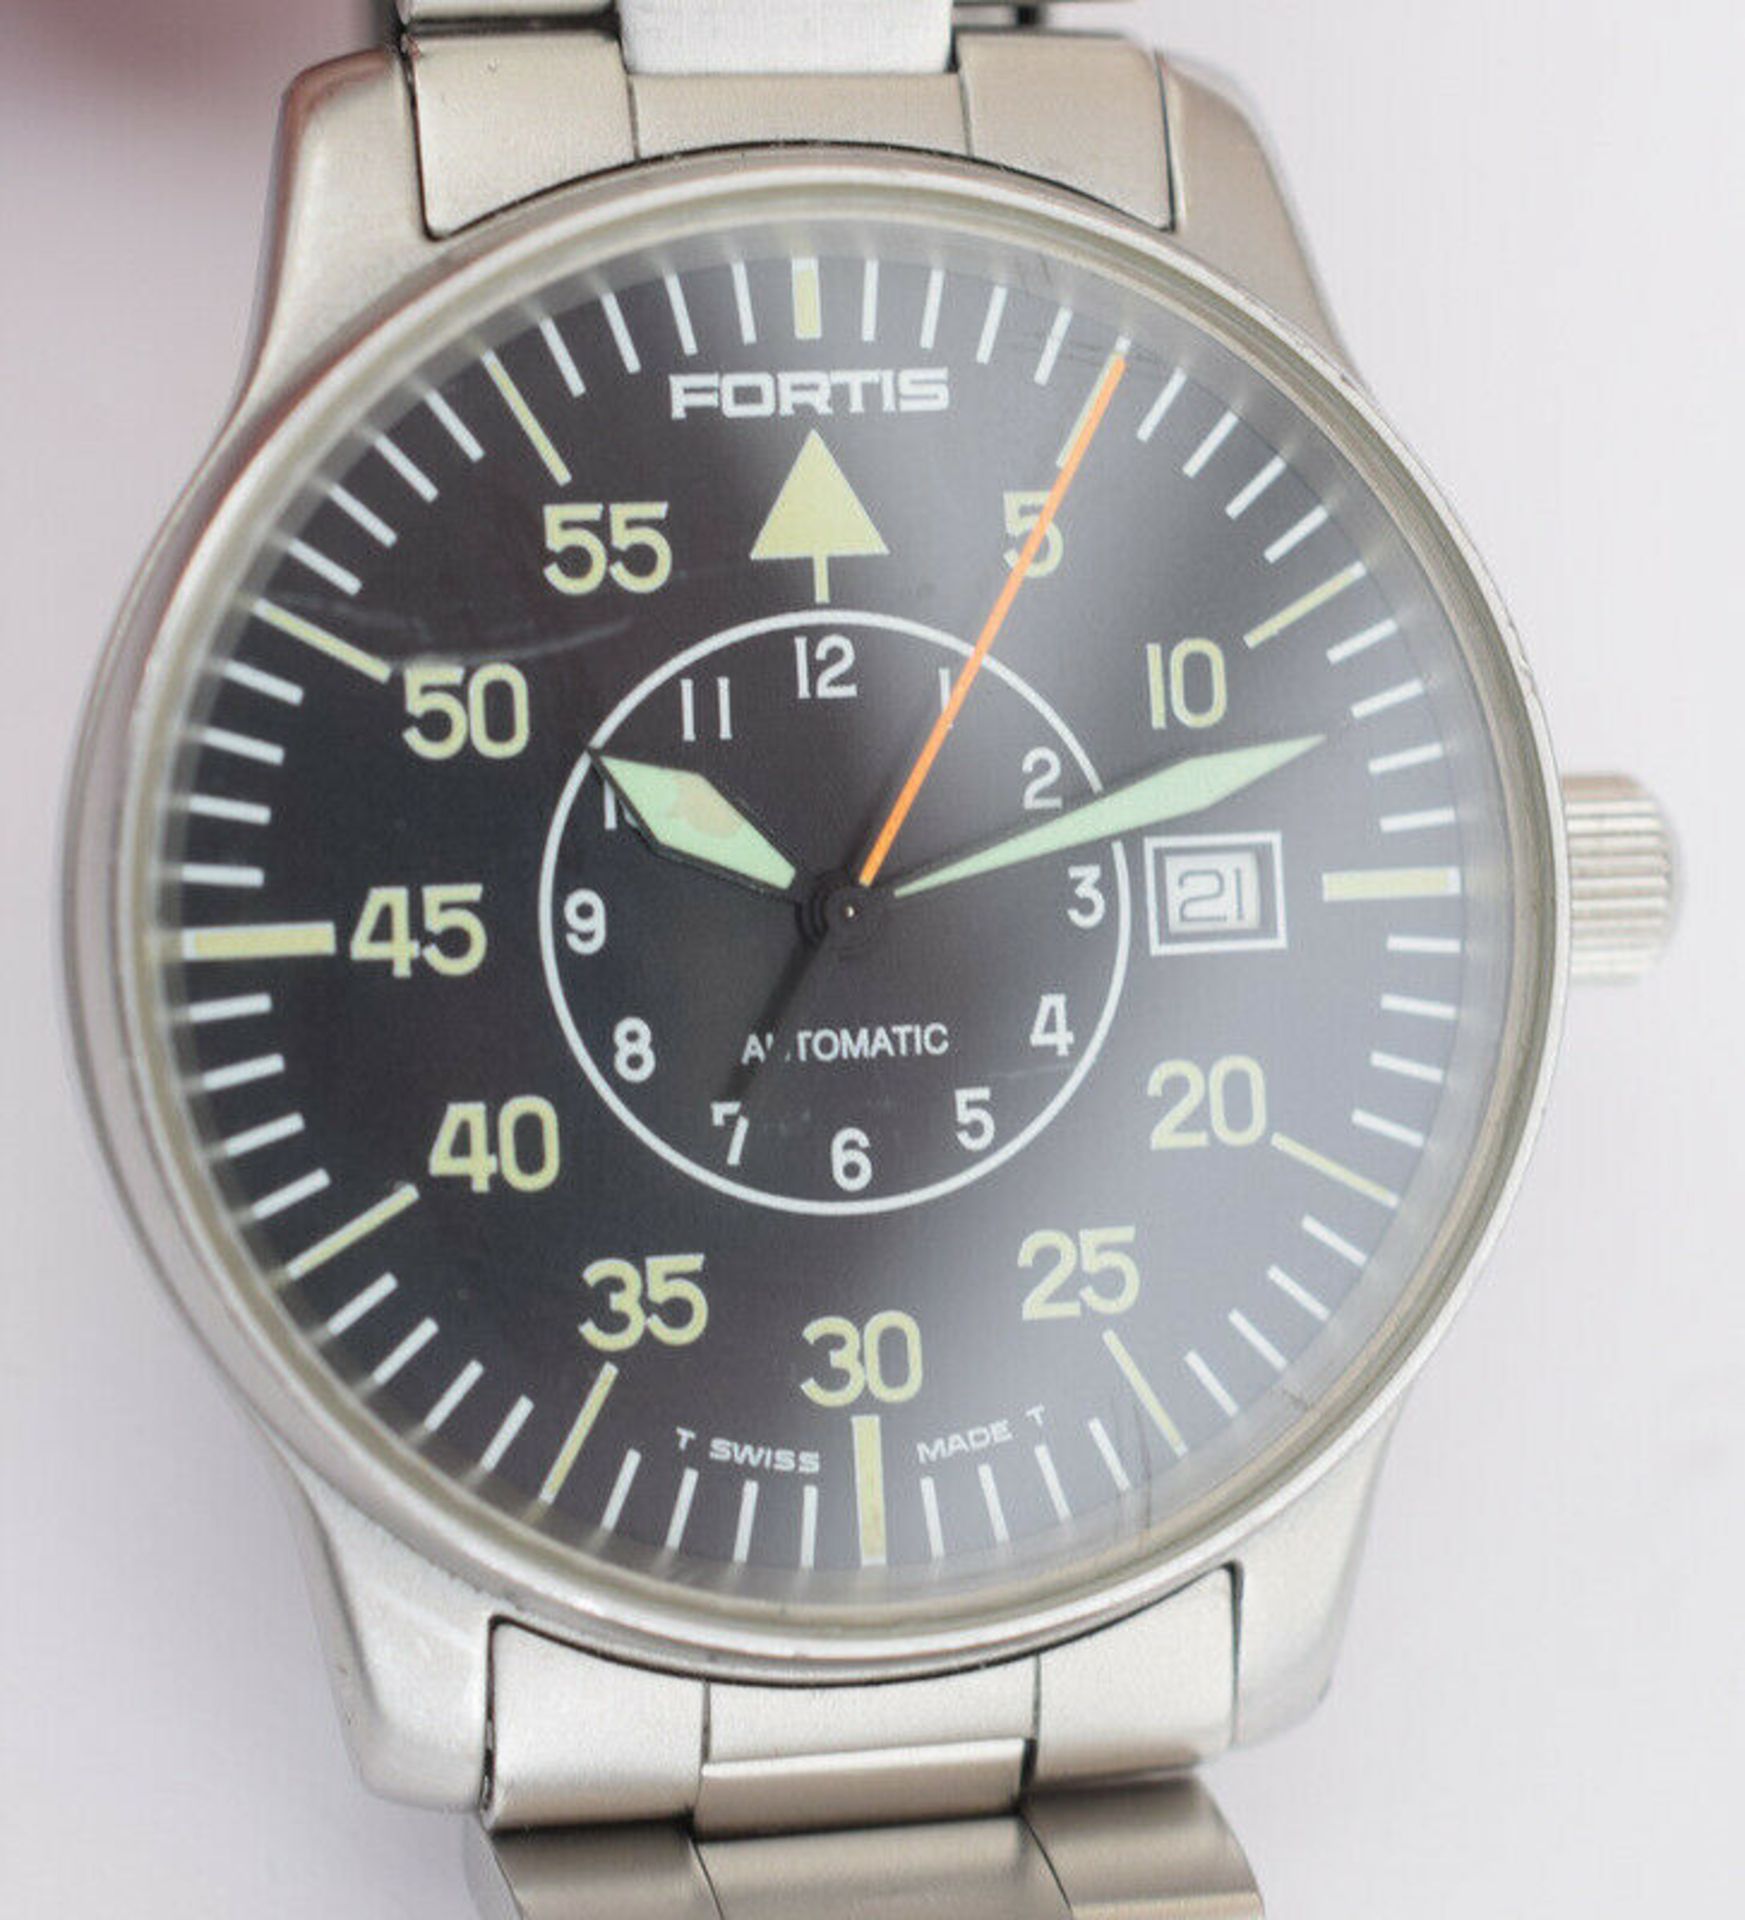 Vintage Fortis Flieger Automatic 595.10.46 Pilot's Watch Full Set - Image 7 of 9